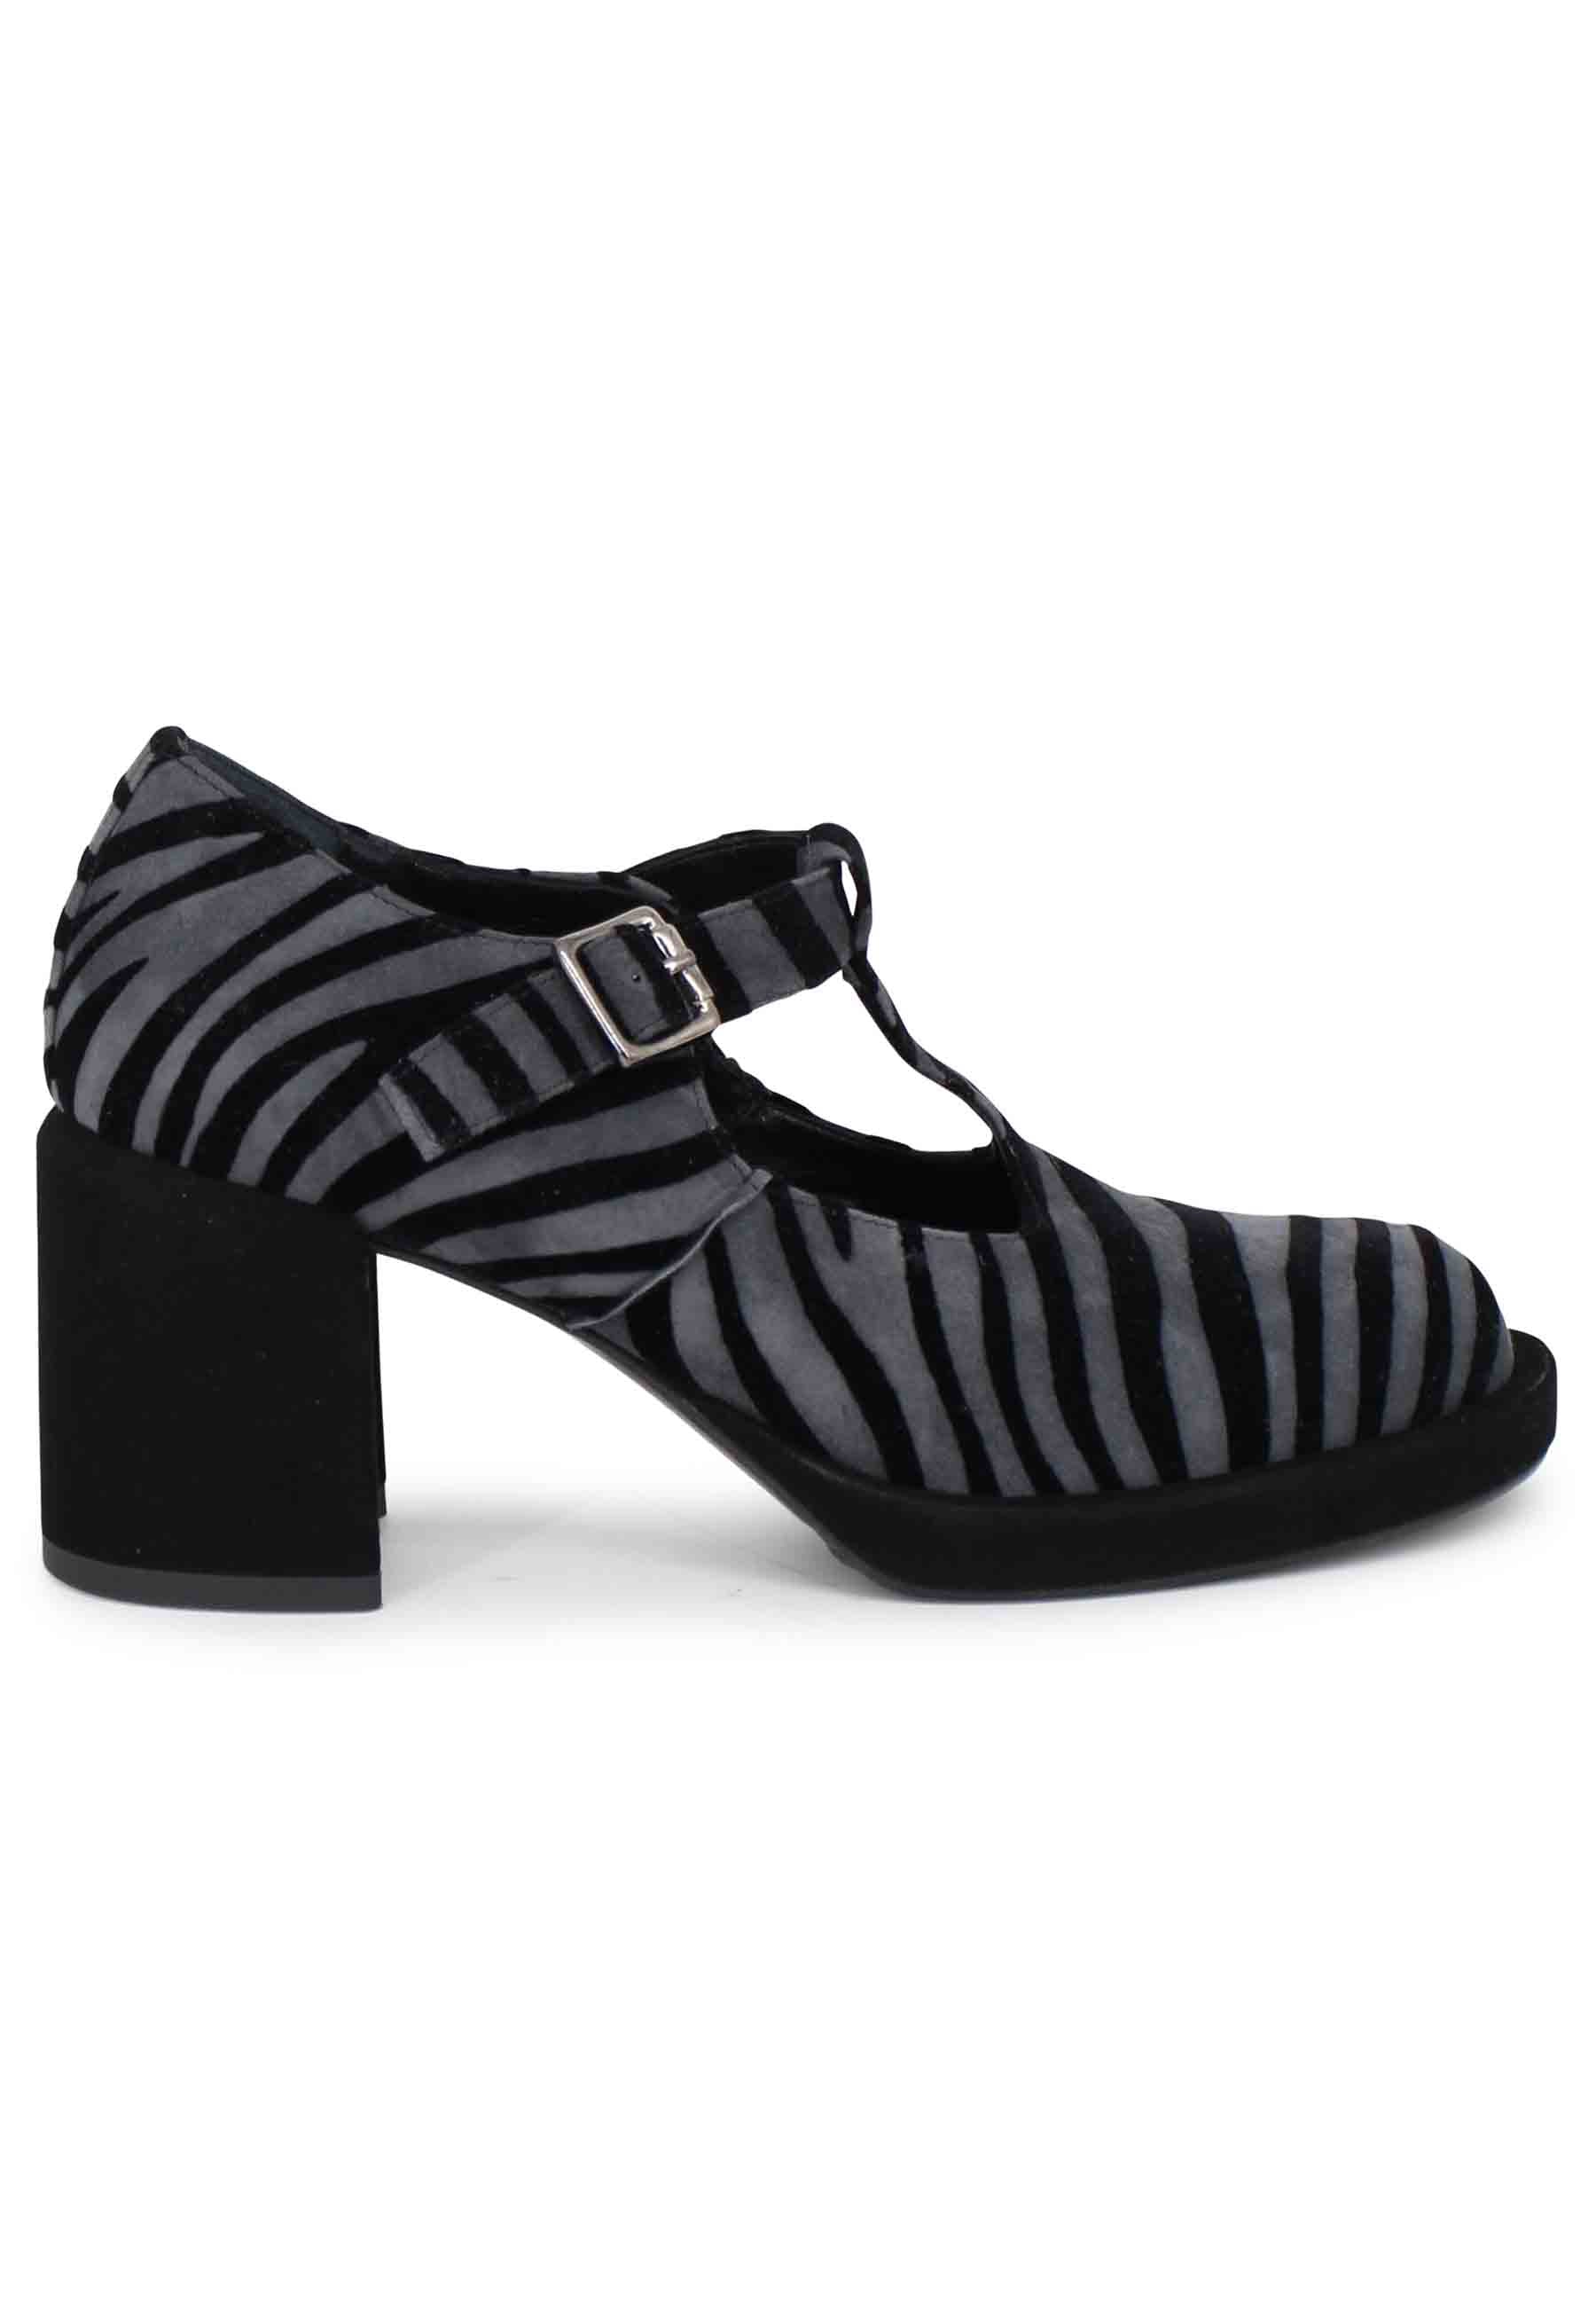 Women's pumps in black and gray suede with heel and plateau